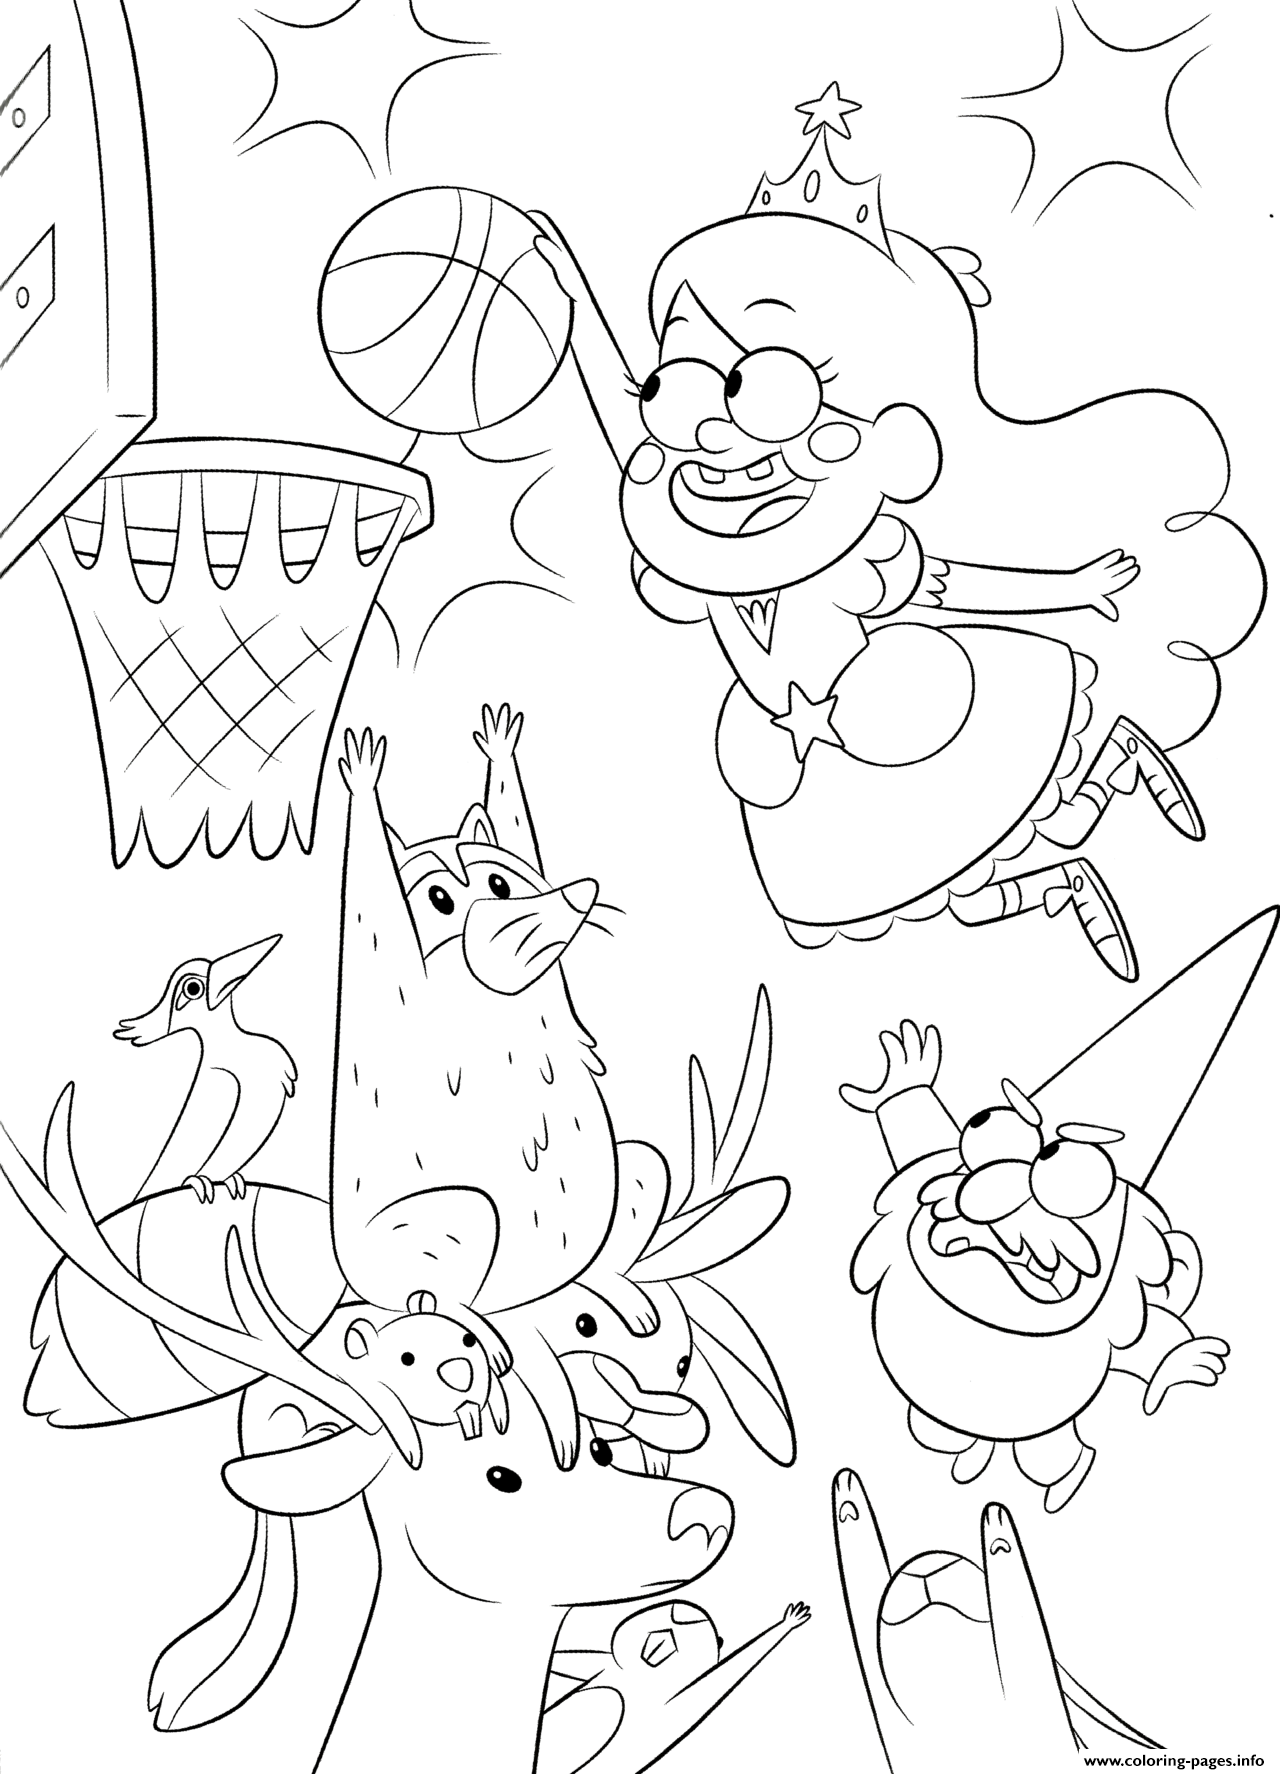 Gravity Falls Playing Basketball Coloring Pages Printable